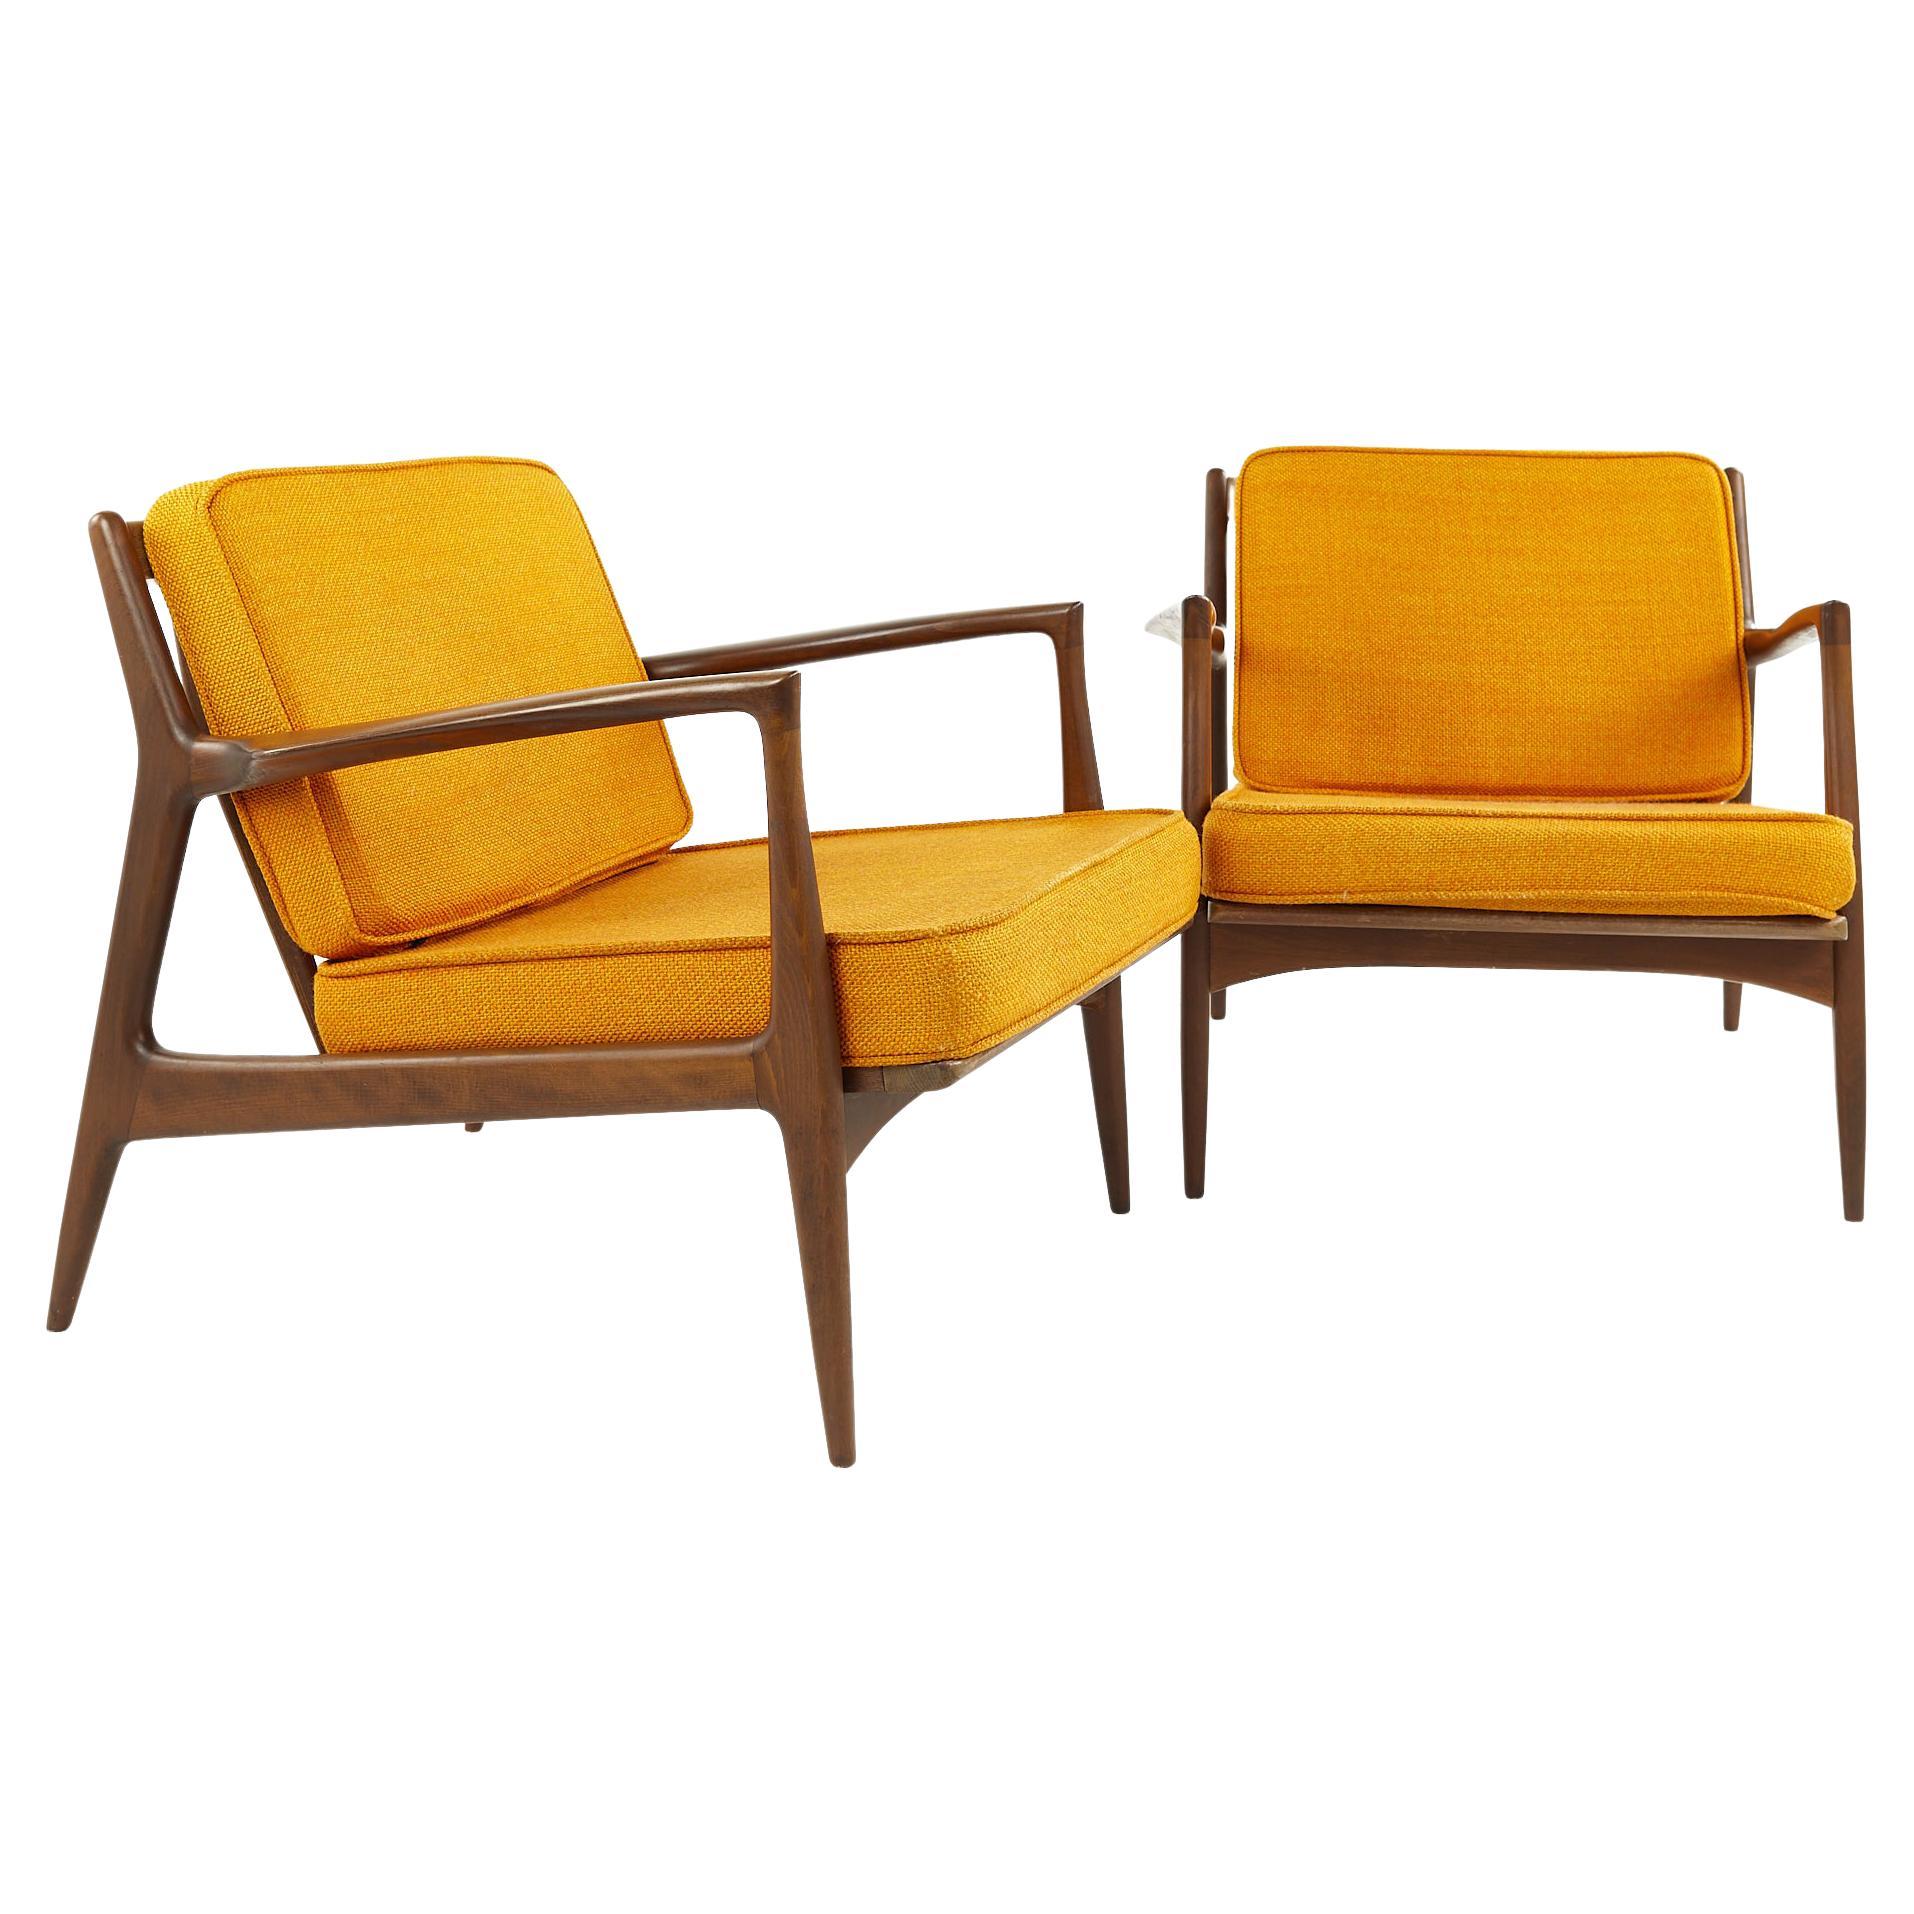 Kofod Larsen for Selig Mid Century Walnut Lounge Chairs, a Pair